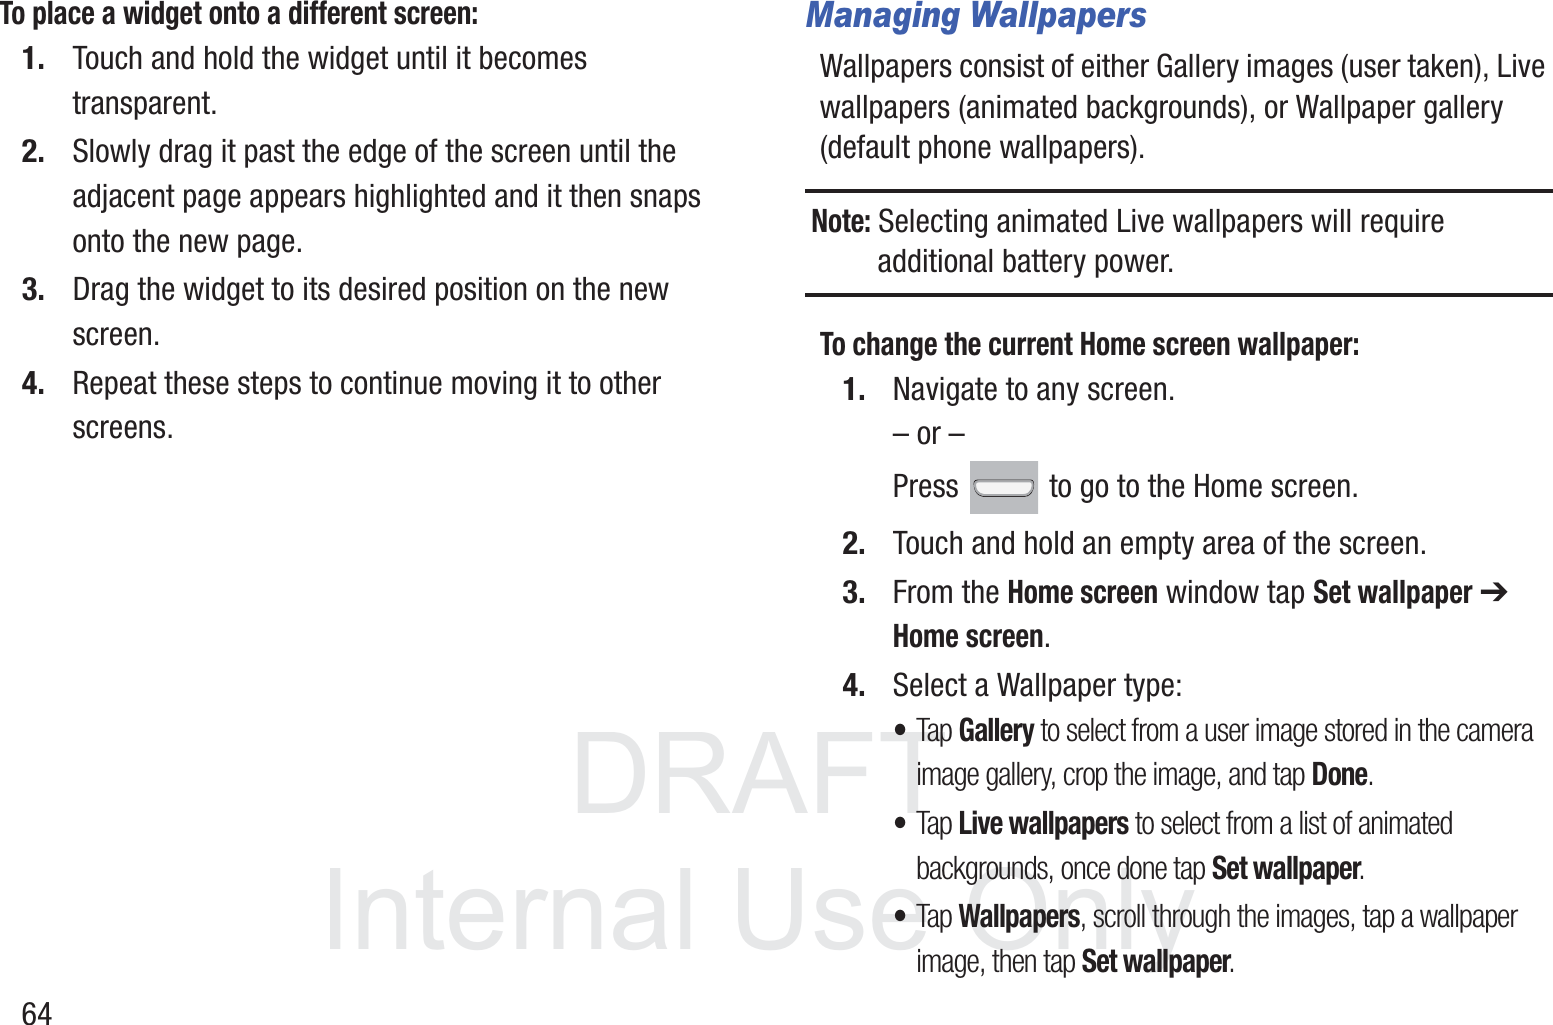 DRAFT InternalUse Only64To place a widget onto a different screen:1. Touch and hold the widget until it becomes transparent.2. Slowly drag it past the edge of the screen until the adjacent page appears highlighted and it then snaps onto the new page.3. Drag the widget to its desired position on the new screen.4. Repeat these steps to continue moving it to other screens.Managing WallpapersWallpapers consist of either Gallery images (user taken), Live wallpapers (animated backgrounds), or Wallpaper gallery (default phone wallpapers).Note: Selecting animated Live wallpapers will require additional battery power.To change the current Home screen wallpaper:1. Navigate to any screen. – or –Press   to go to the Home screen.  2. Touch and hold an empty area of the screen.3. From the Home screen window tap Set wallpaper ➔ Home screen.4. Select a Wallpaper type:•Tap Gallery to select from a user image stored in the camera image gallery, crop the image, and tap Done.•Tap Live wallpapers to select from a list of animated backgrounds, once done tap Set wallpaper. •Tap Wallpapers, scroll through the images, tap a wallpaper image, then tap Set wallpaper.